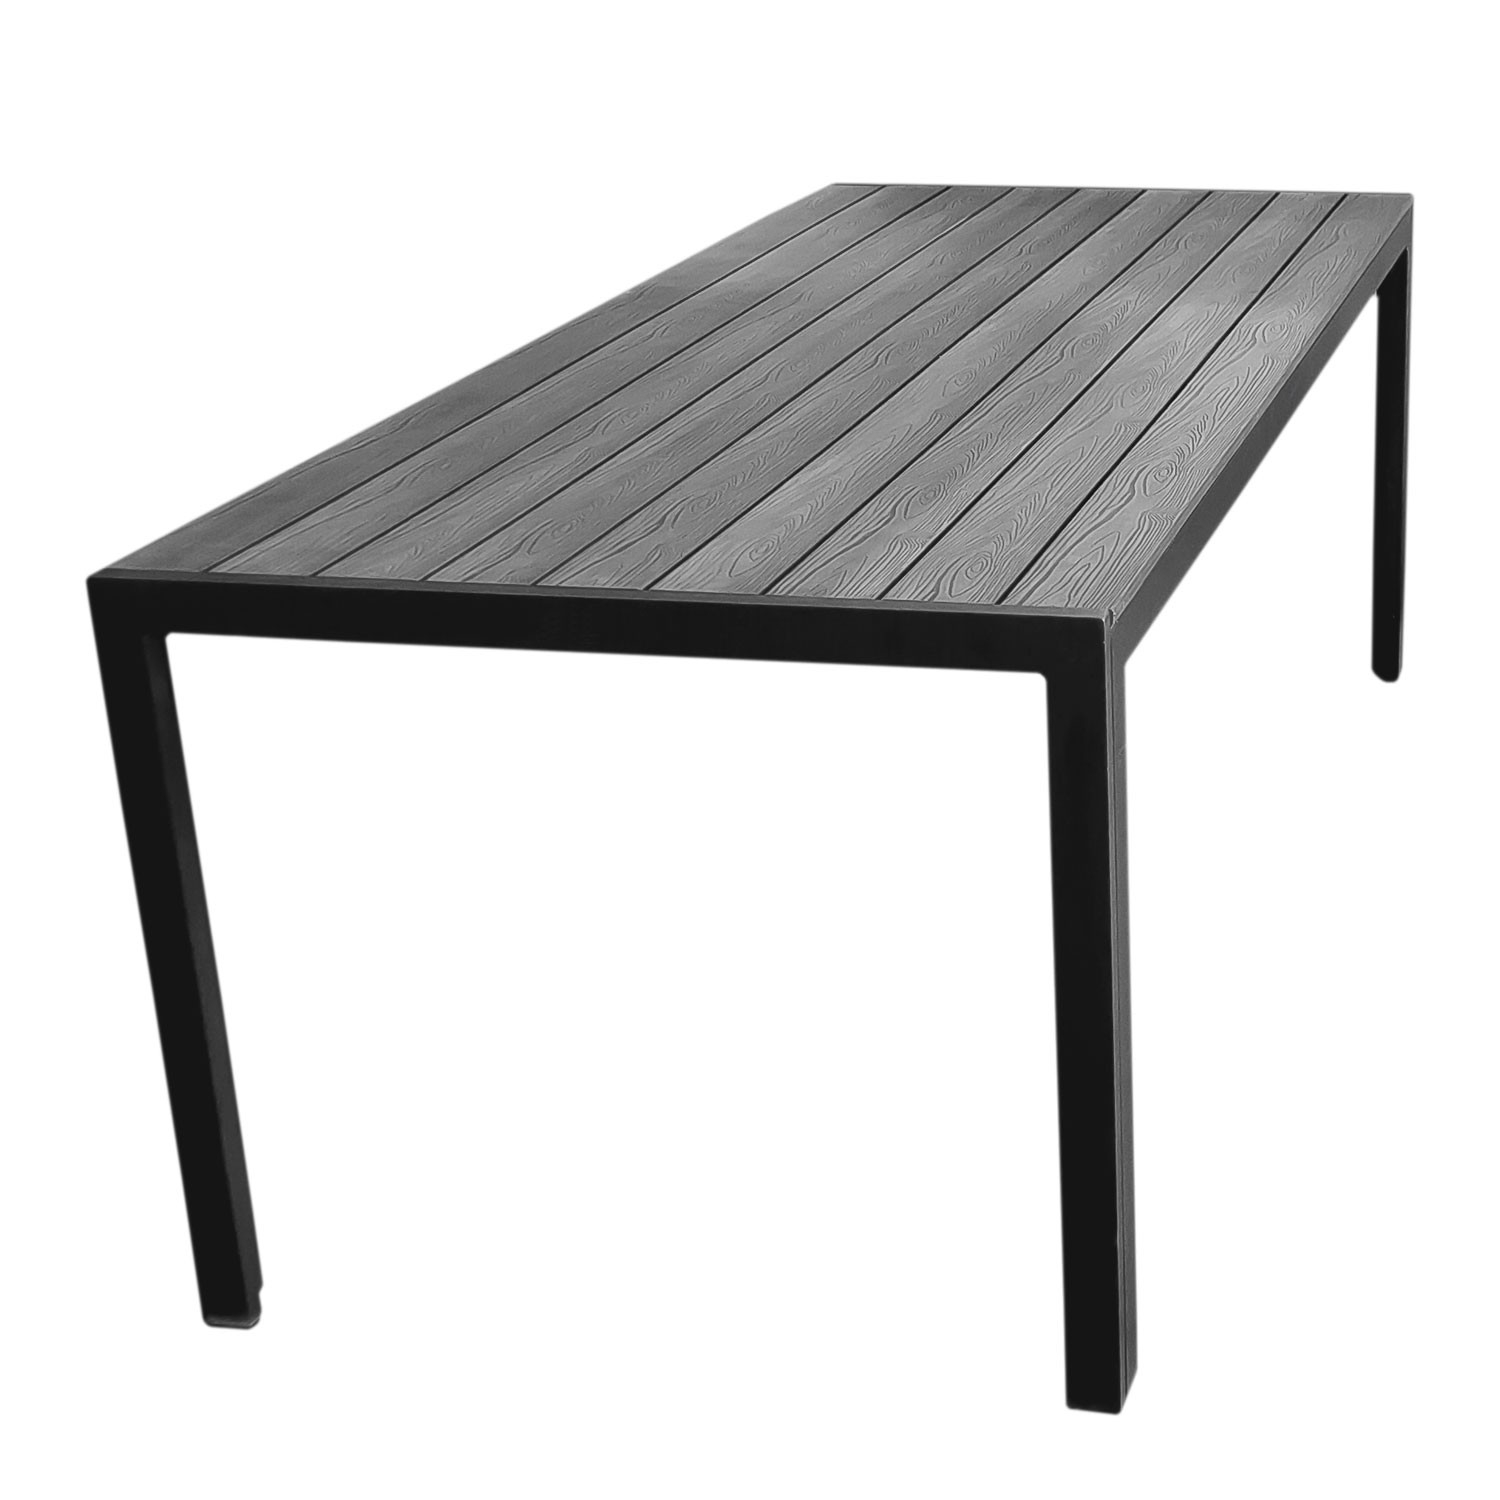 Garden Table Aluminium With Polywood Table Top With Holzprgung 150 X 90 Cm Balcony Patio Furniture Dining Table Black Grey Ceres Webshop regarding dimensions 1500 X 1500